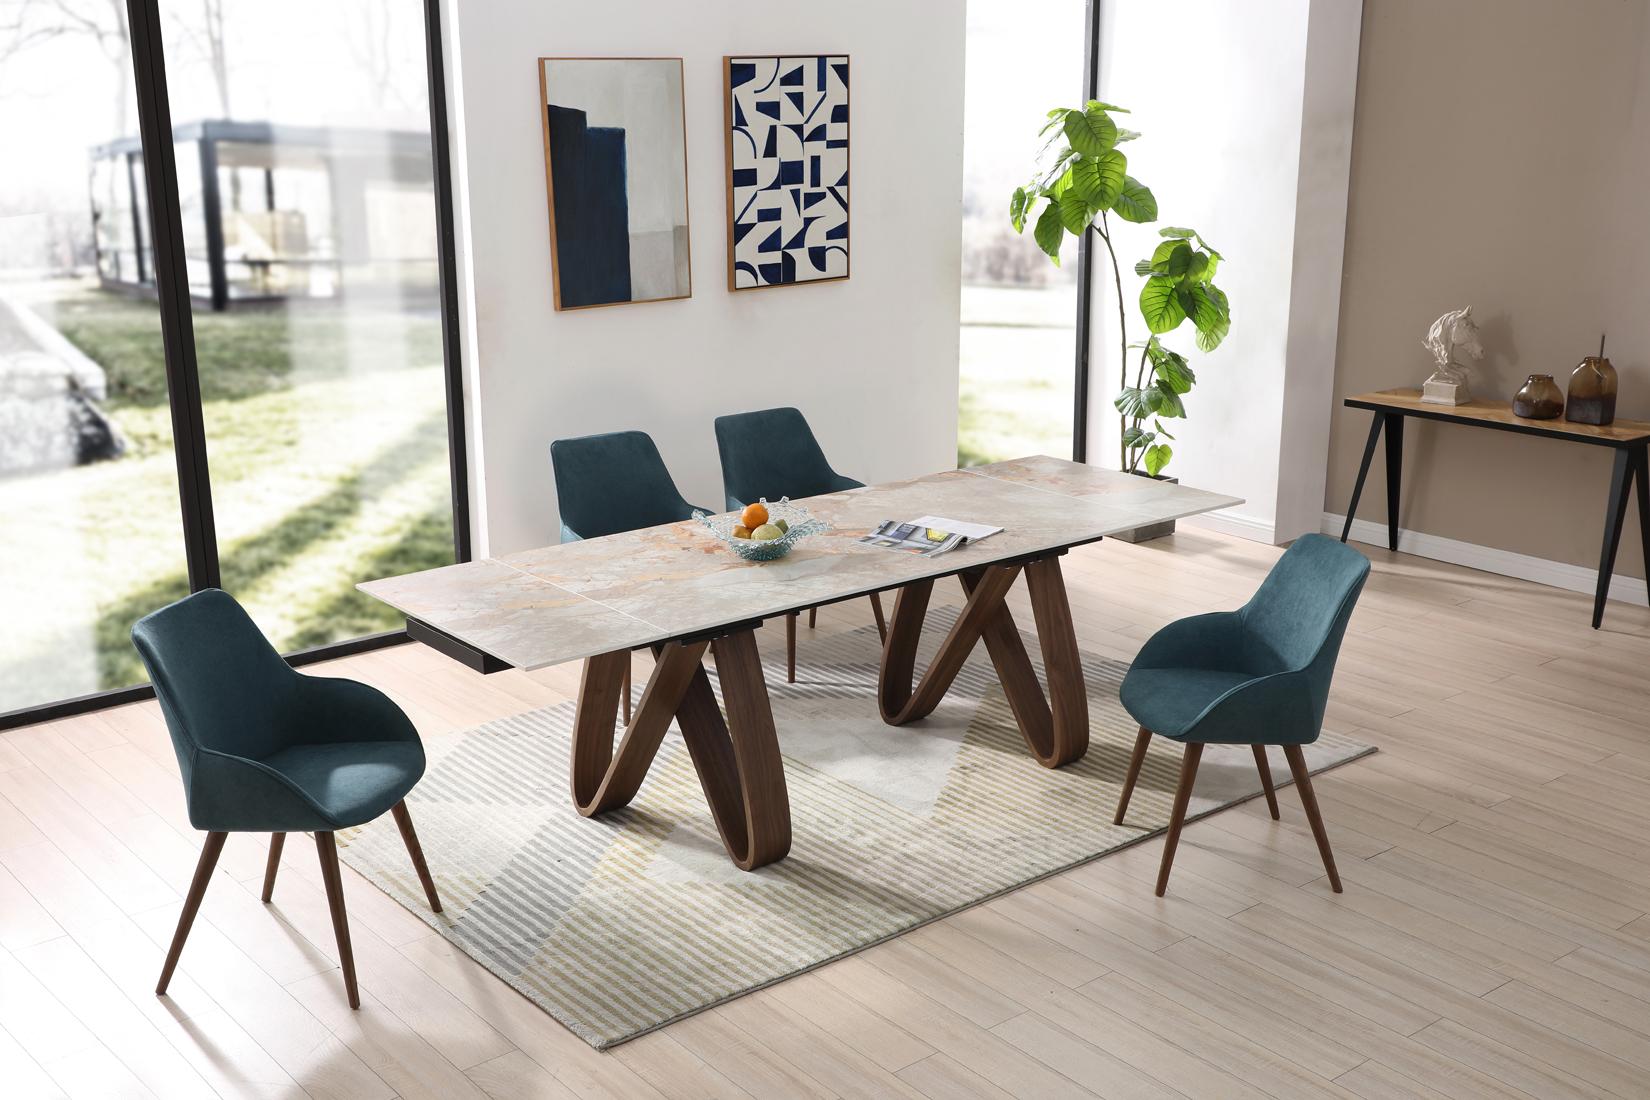 Contemporary Dining Table Set 9086TABLE 9086TABLE-5PC in Walnut, Emerald, Beige Fabric